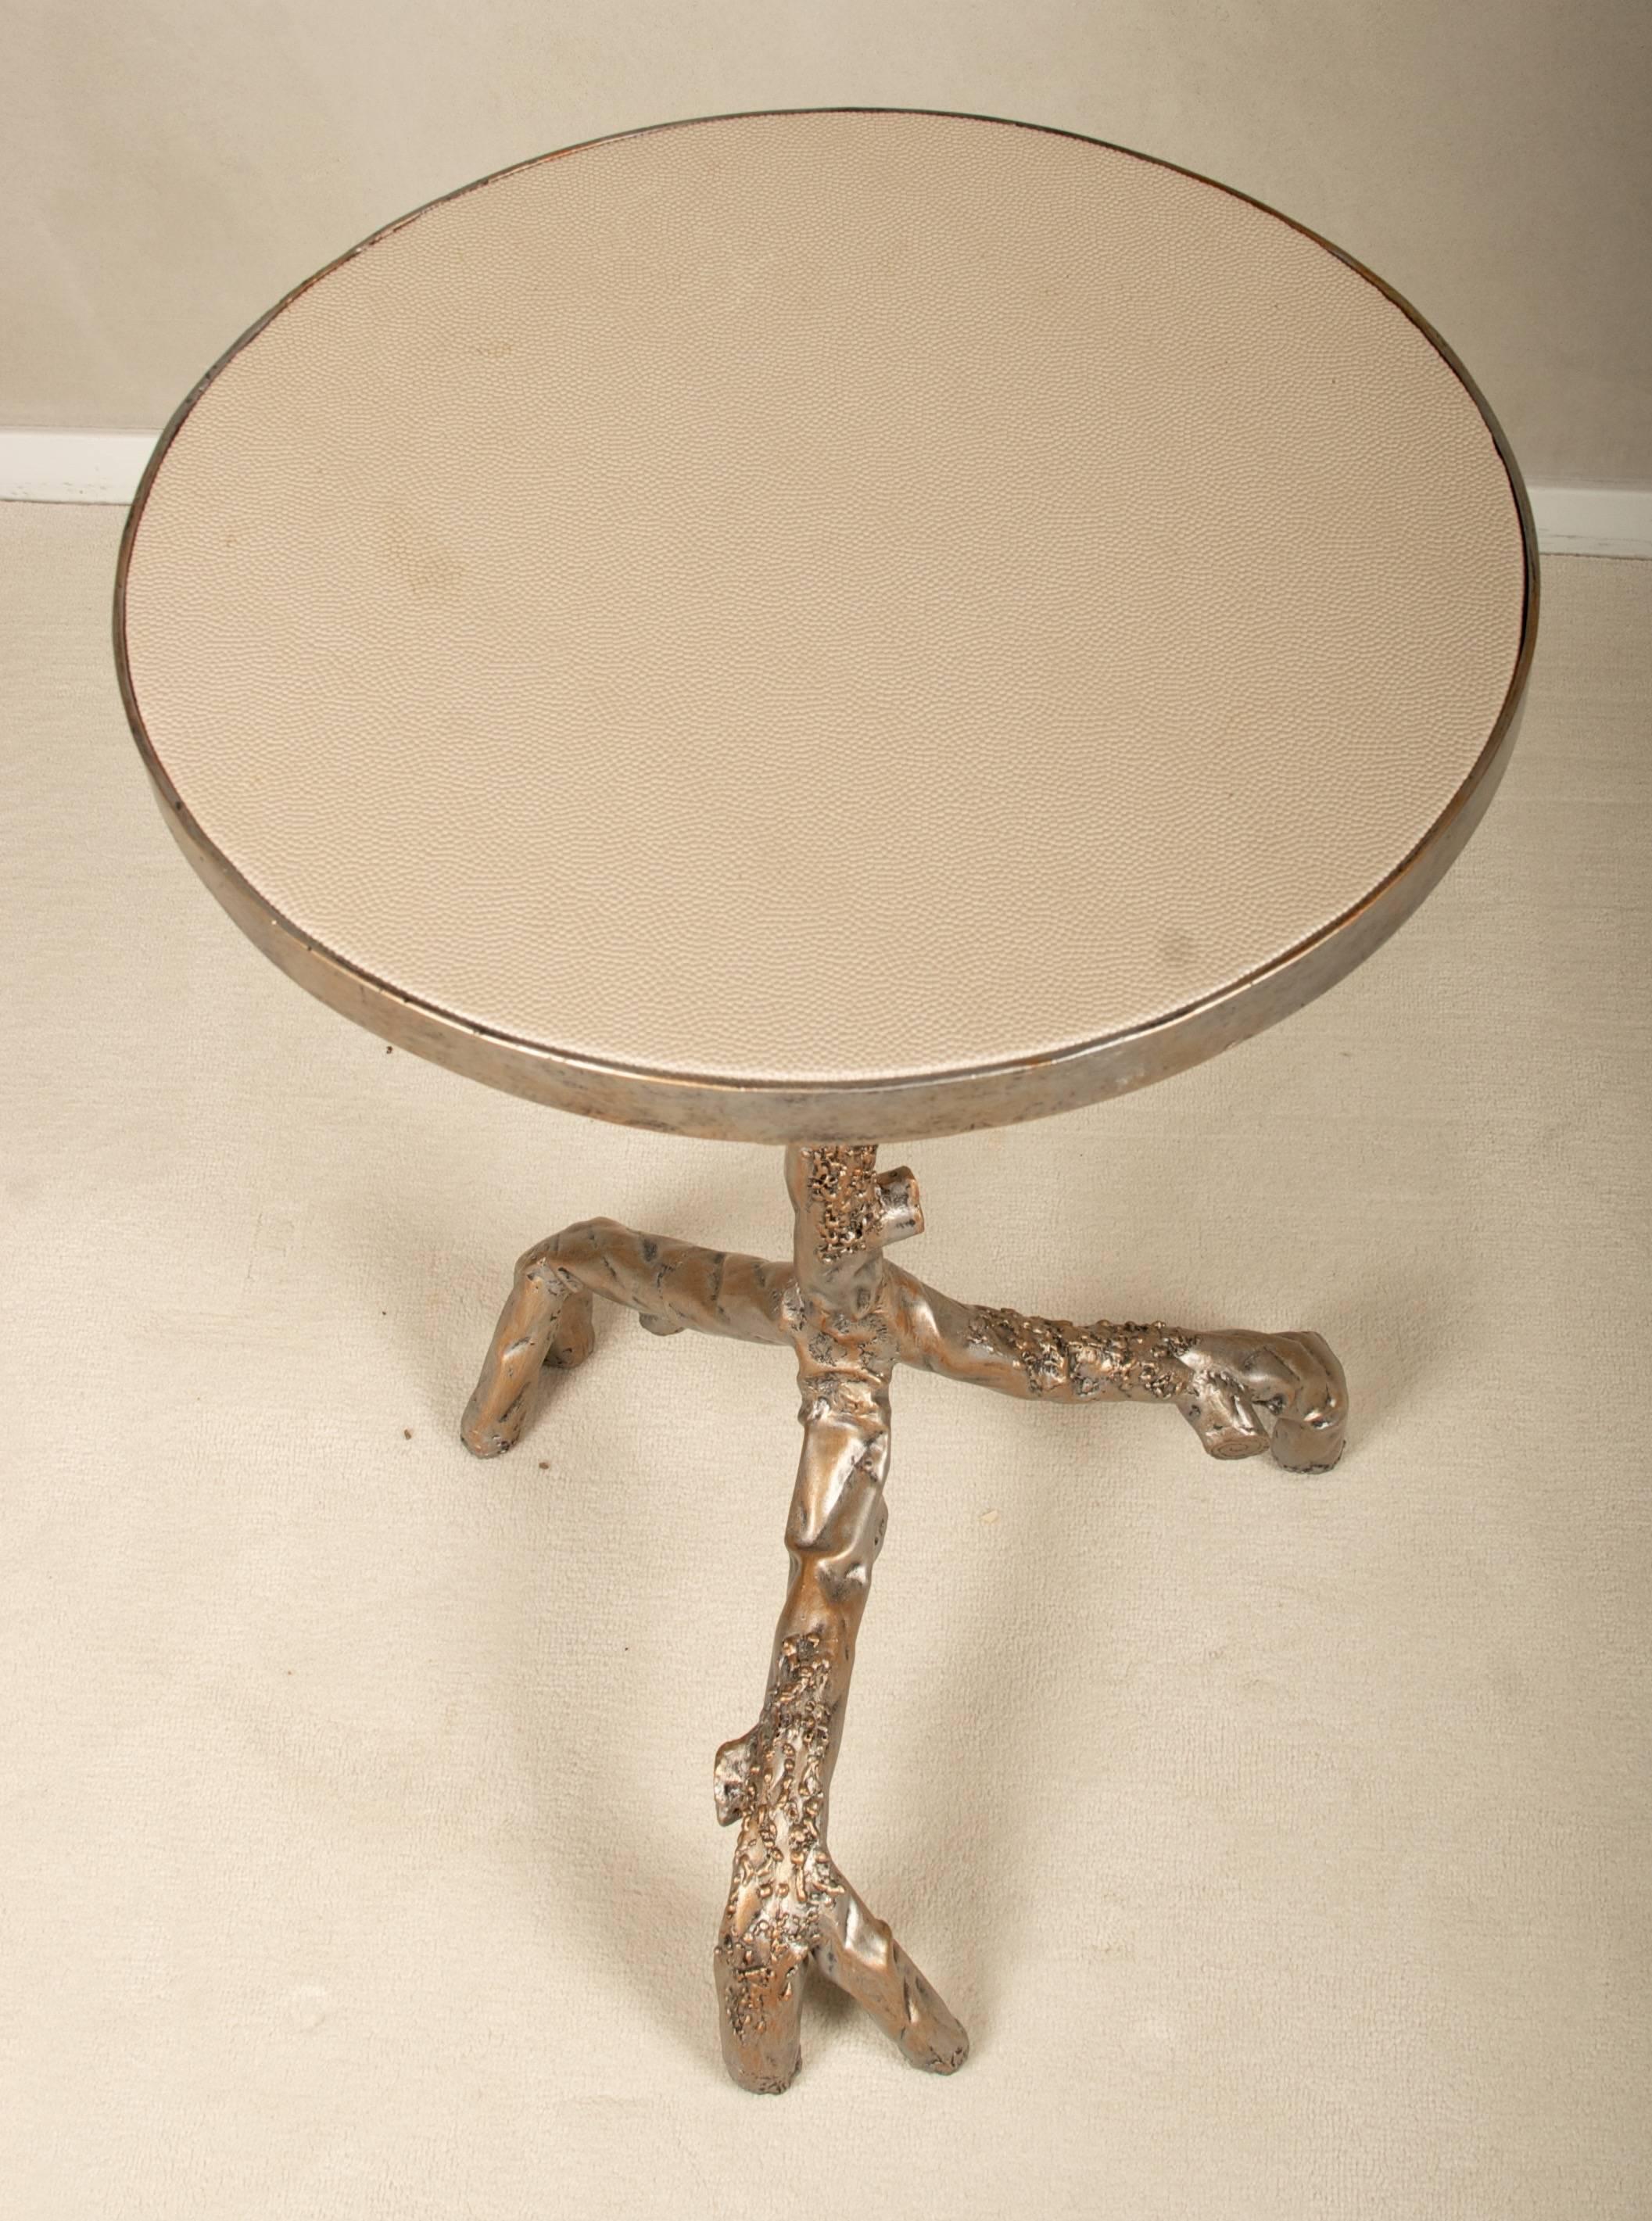 A lovely tree branch design side table with faux leather inset top.
               